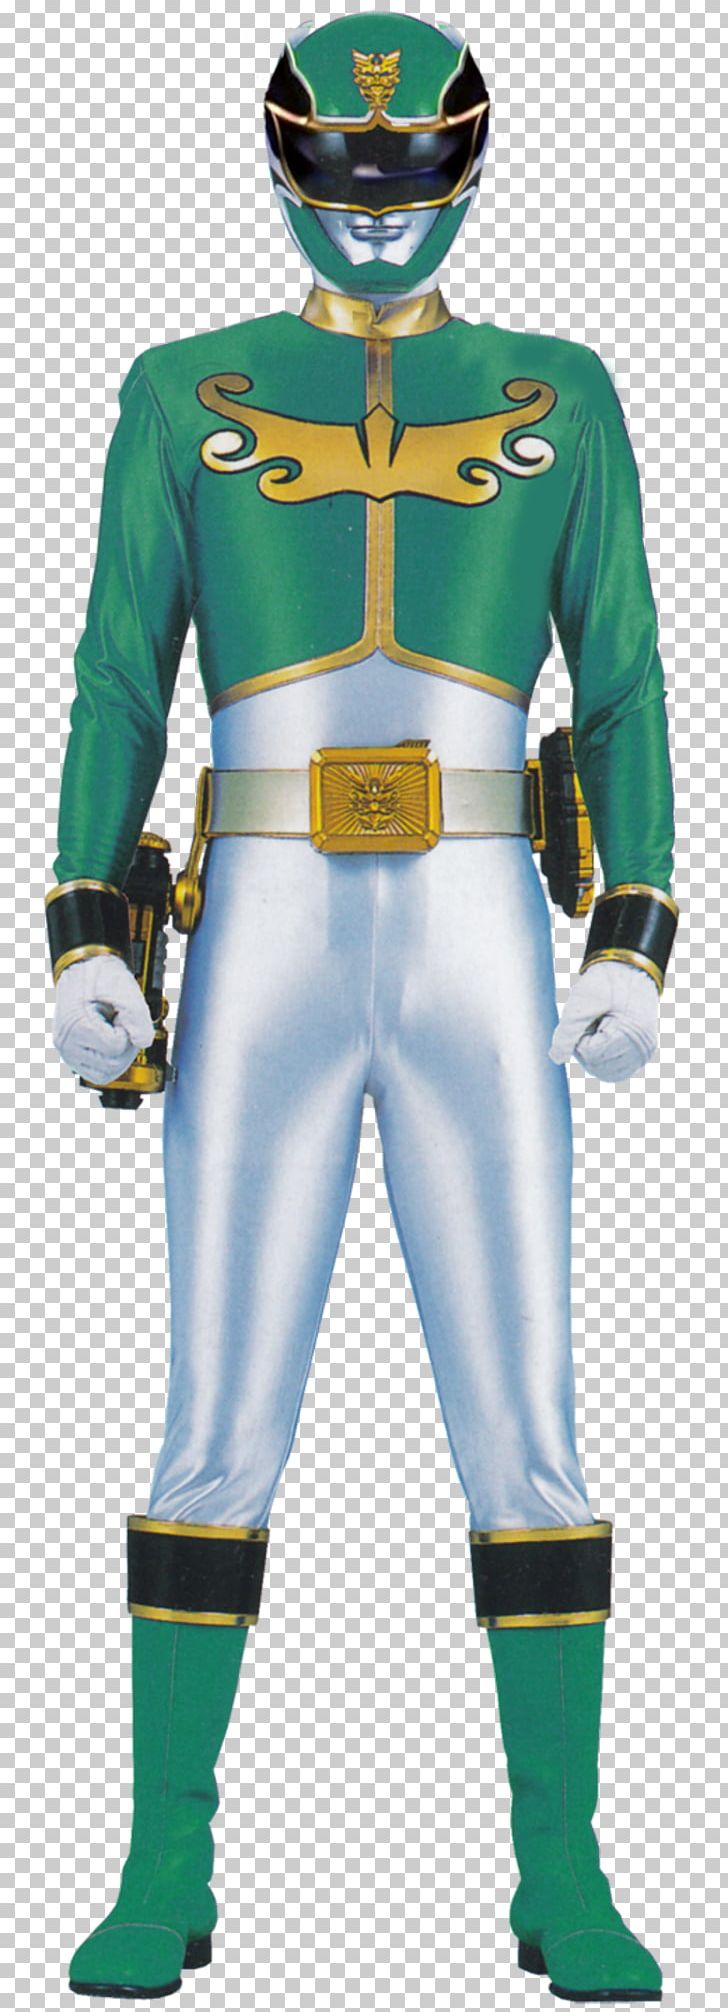 Tommy Oliver Super Sentai Noah Carver Power Rangers Megaforce PNG, Clipart, Action Figure, Fictional Character, Kaizoku Sentai Gokaiger, Mighty Morphin Power Rangers, Miscellaneous Free PNG Download